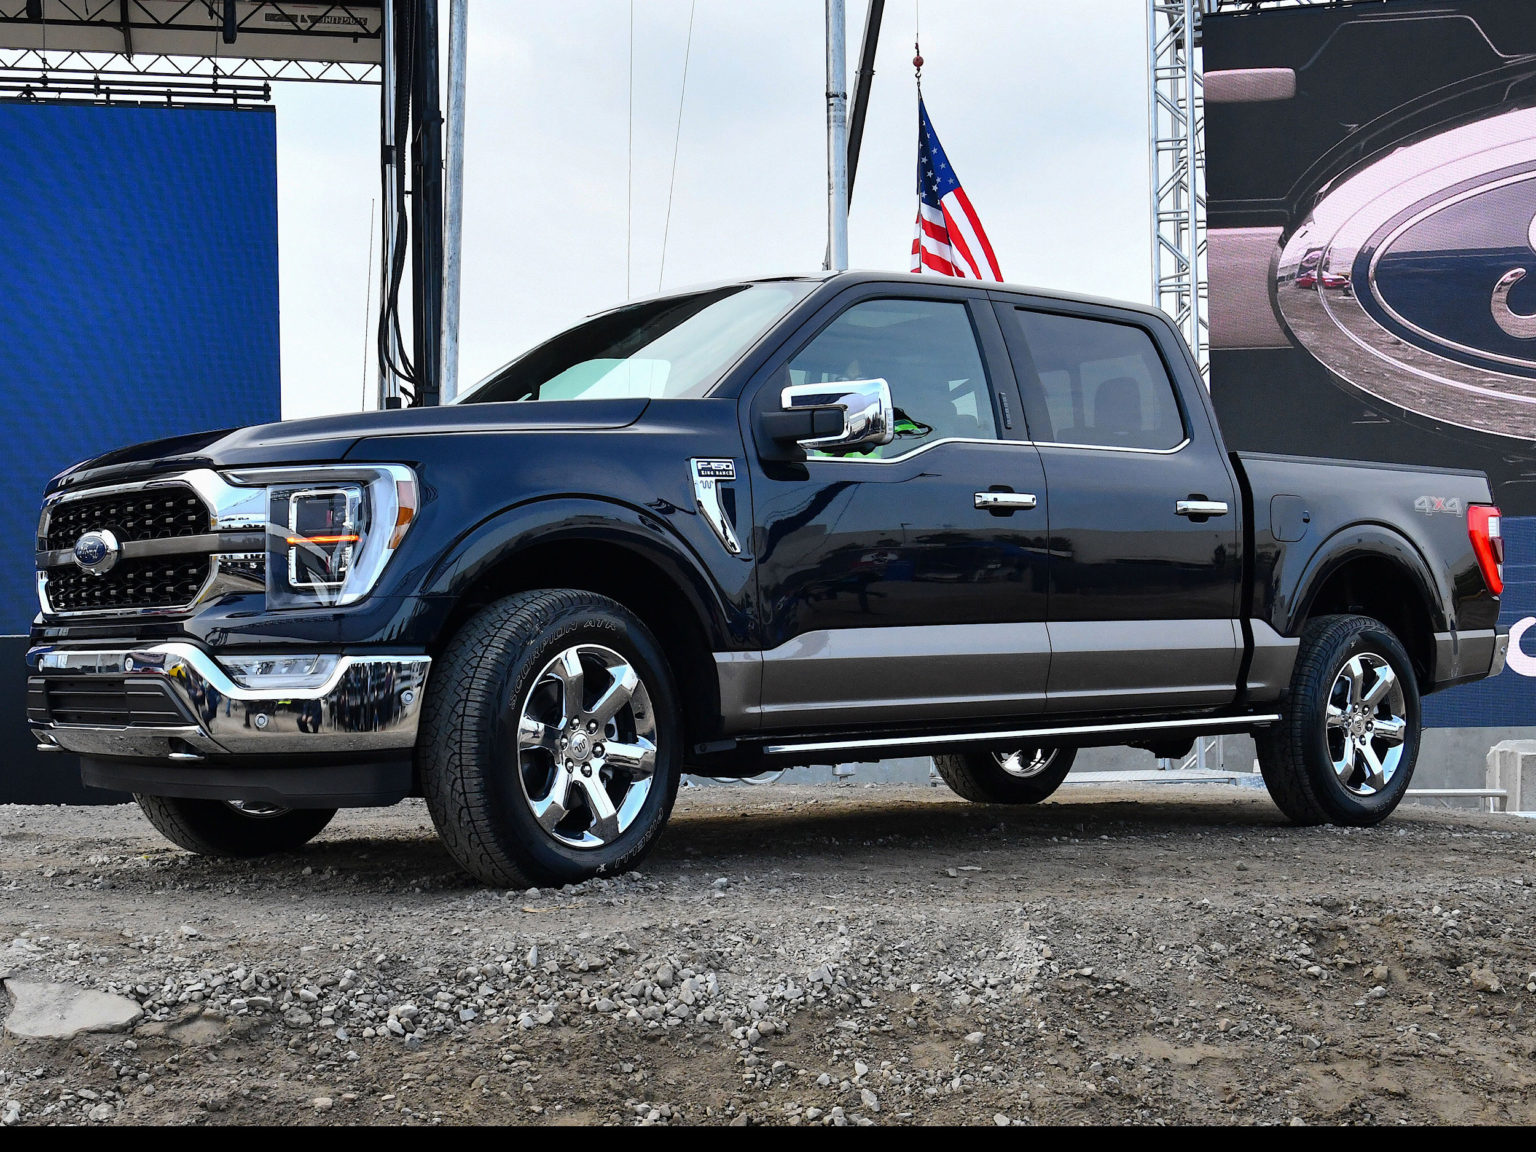 The 2021 Ford F-150 will come in a hybrid variant